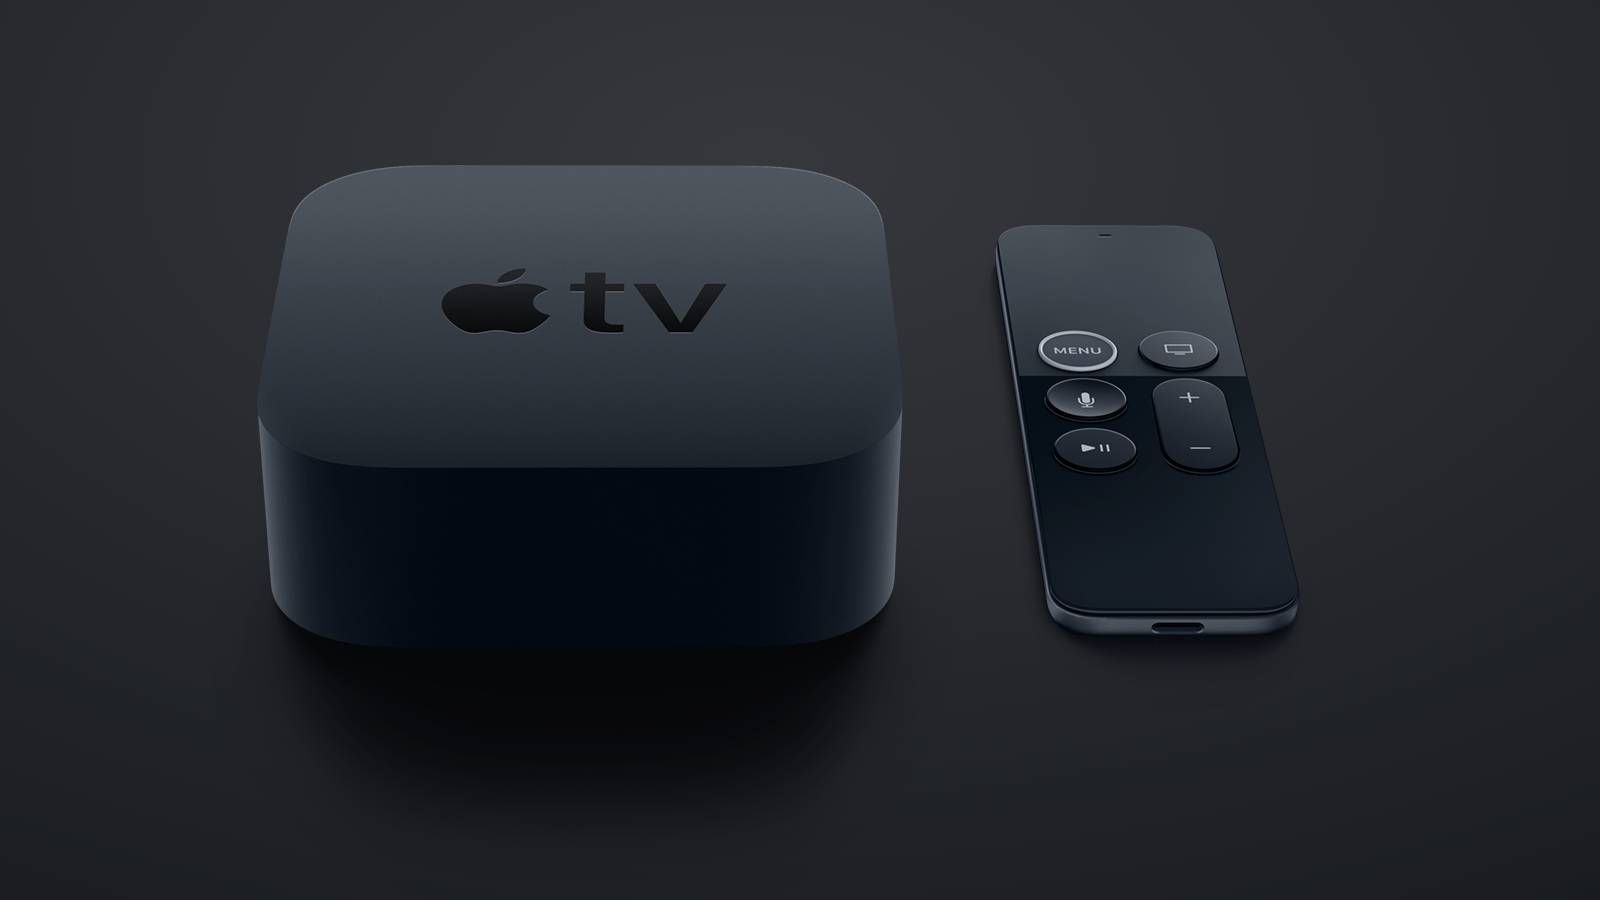 Apple removes mentions to ‘Siri Remote’ in tvOS 14.5 Beta, changes the name of the ‘Home’ button